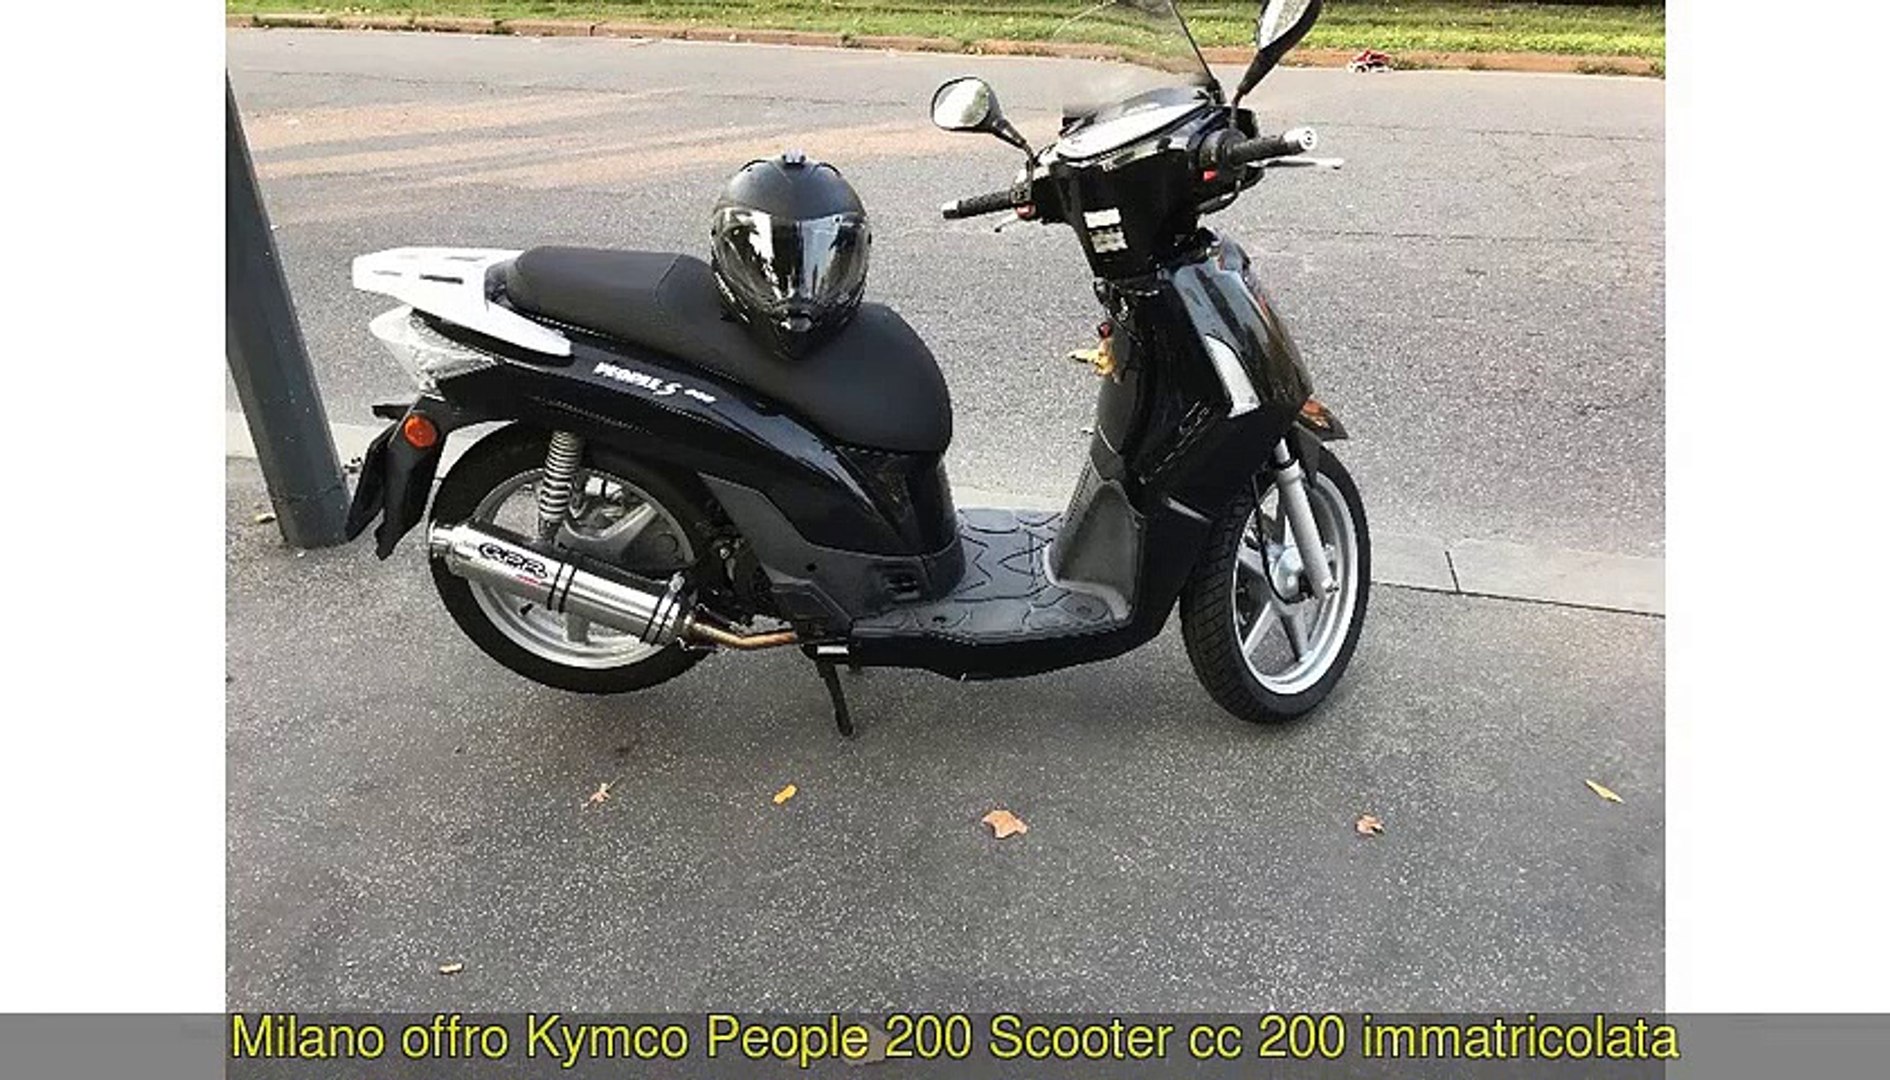 KYMCO People 200 Scooter cc200 - Video Dailymotion